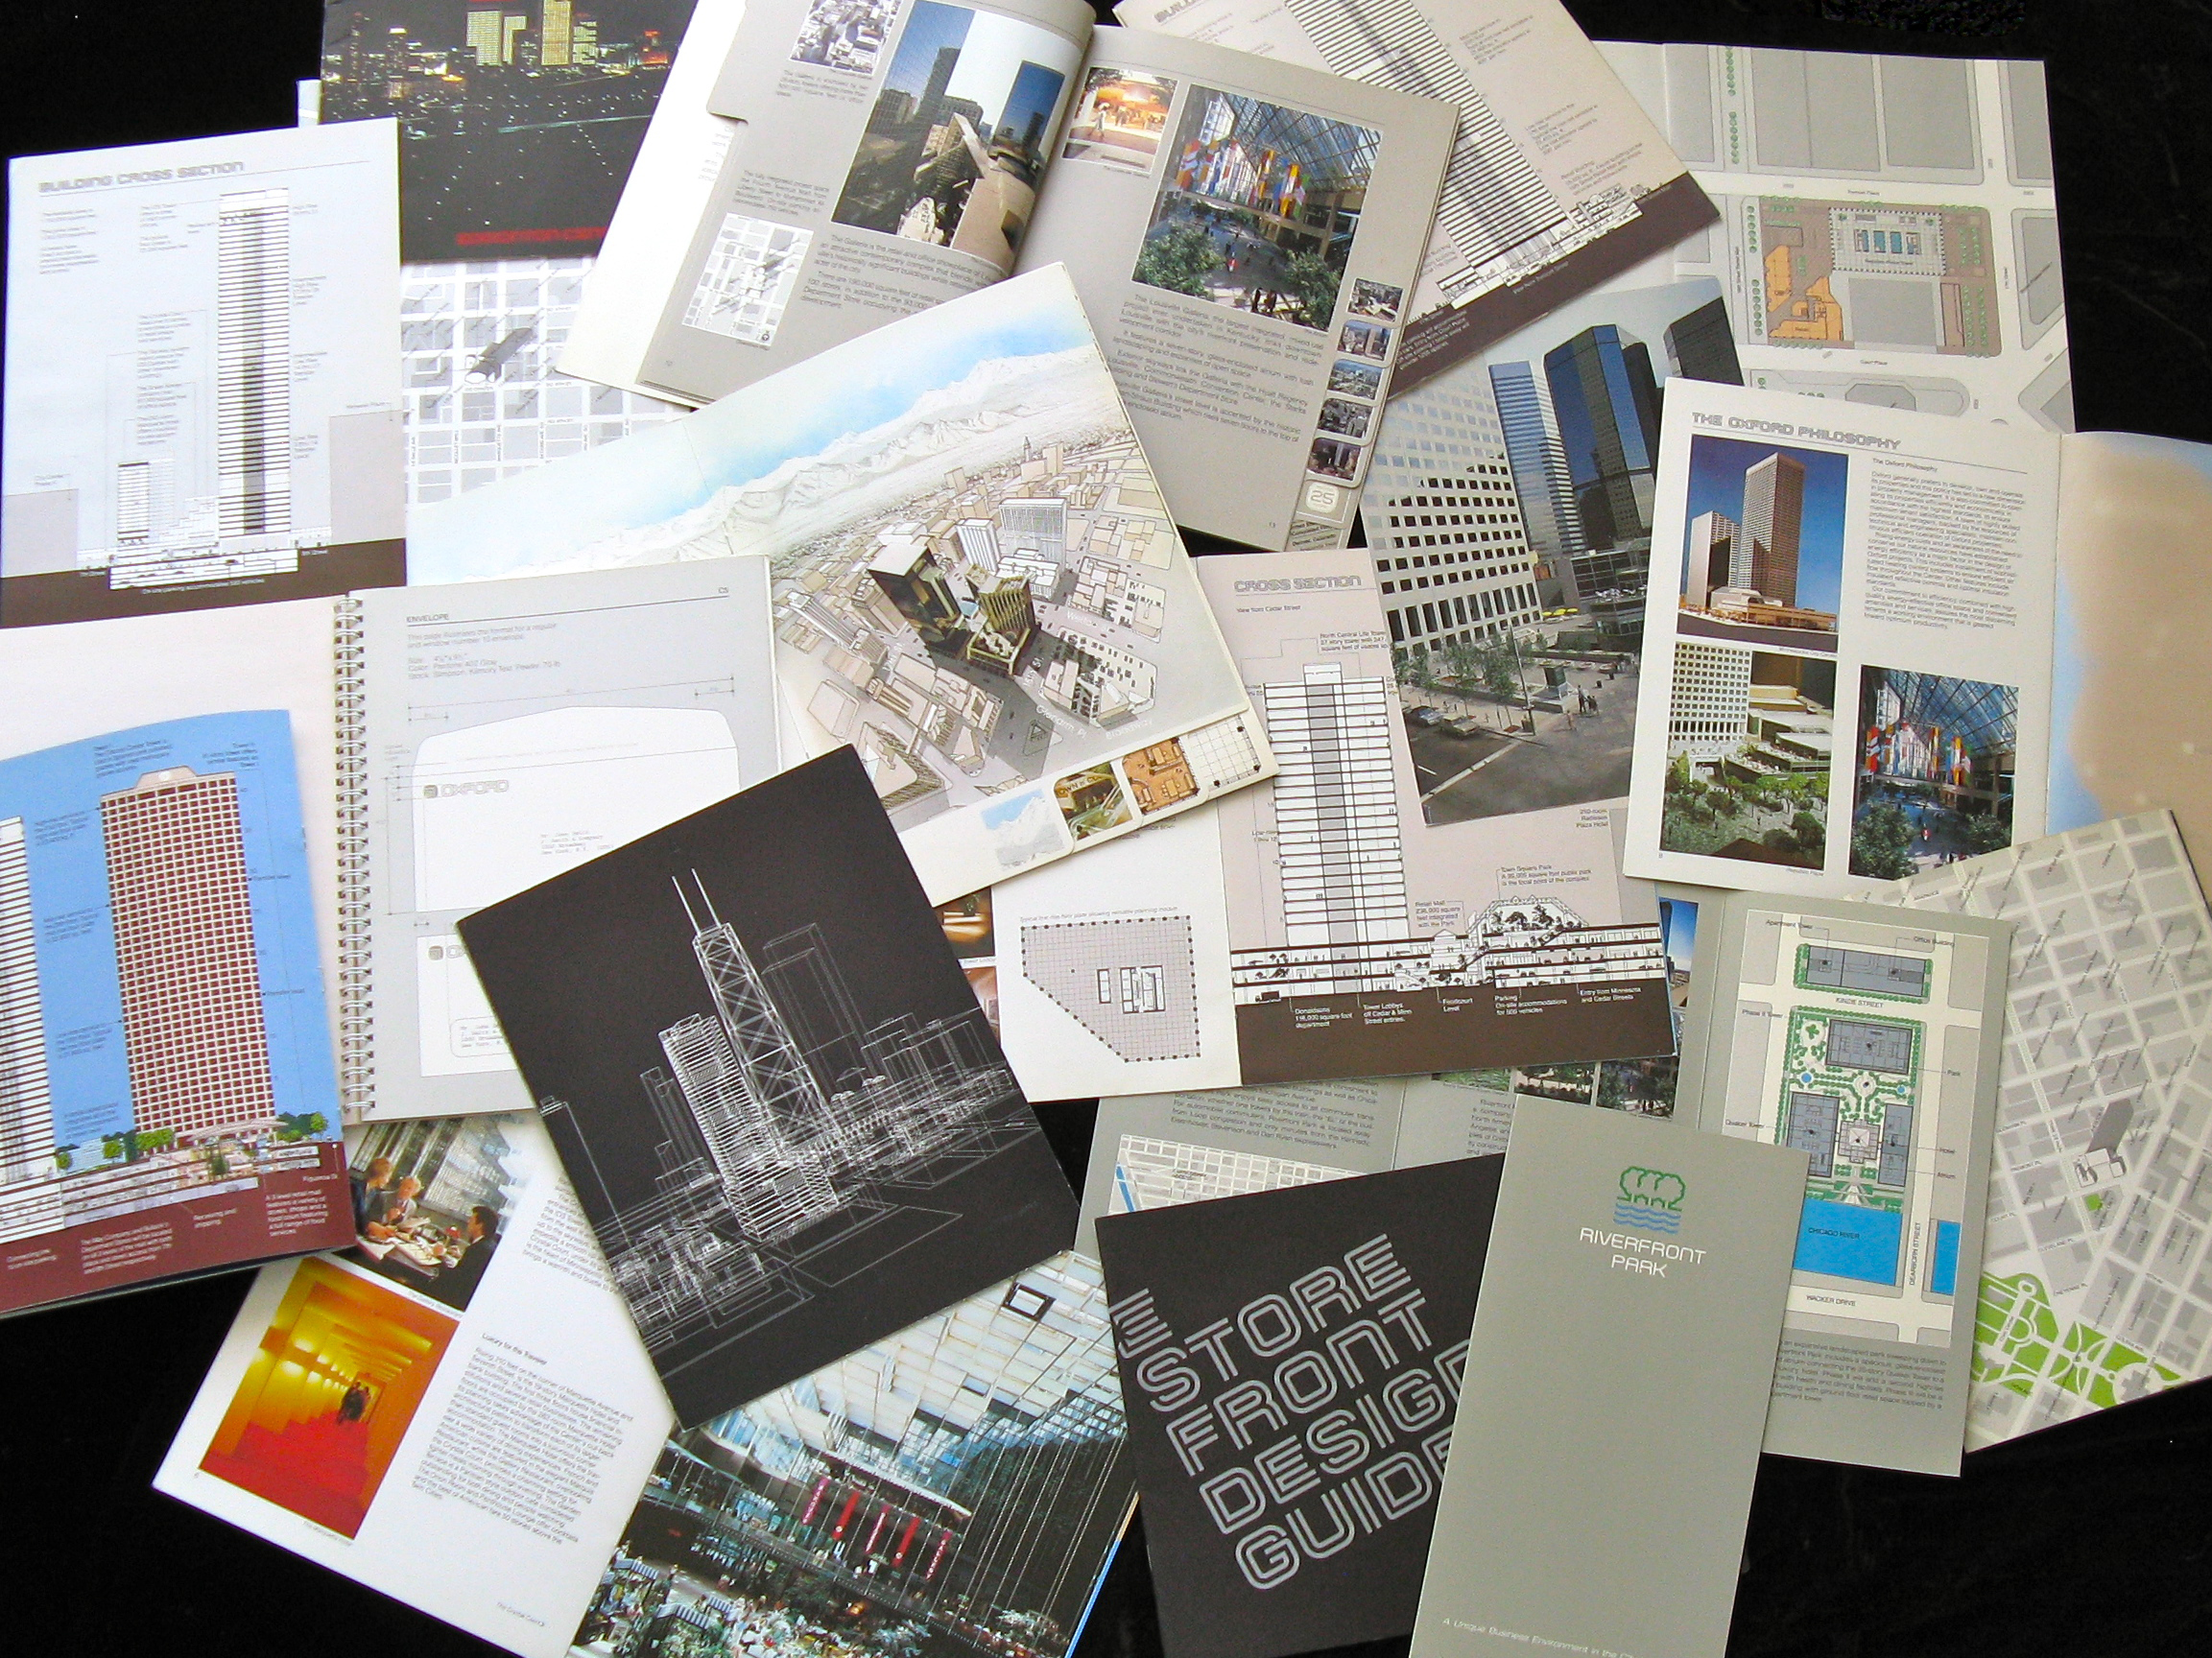 A collection of Oxford Properties brochures spread out on a table.